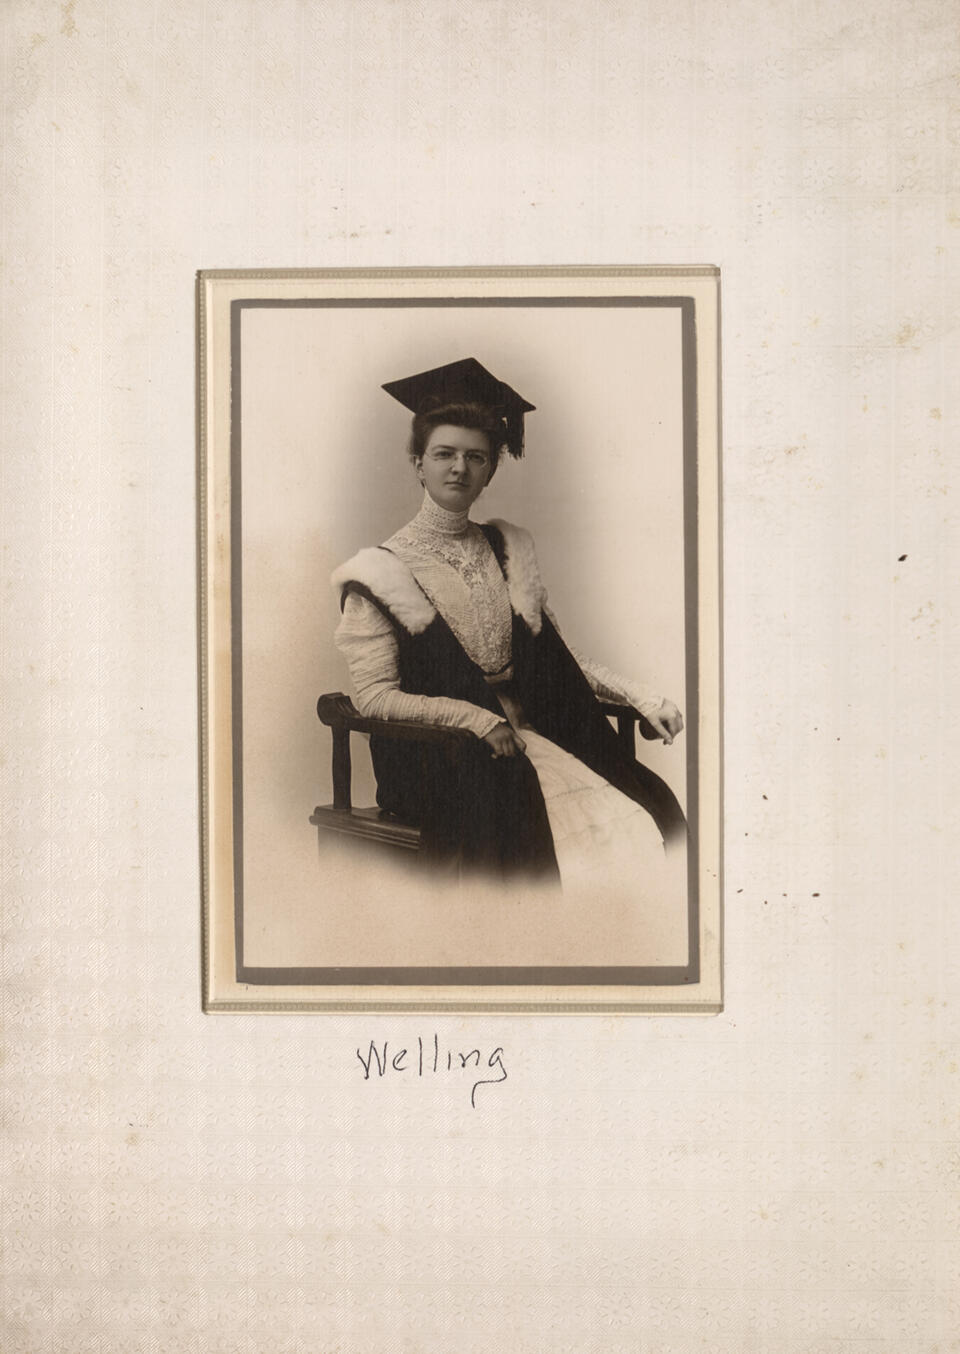 1909 Beatrice Winifred Welling